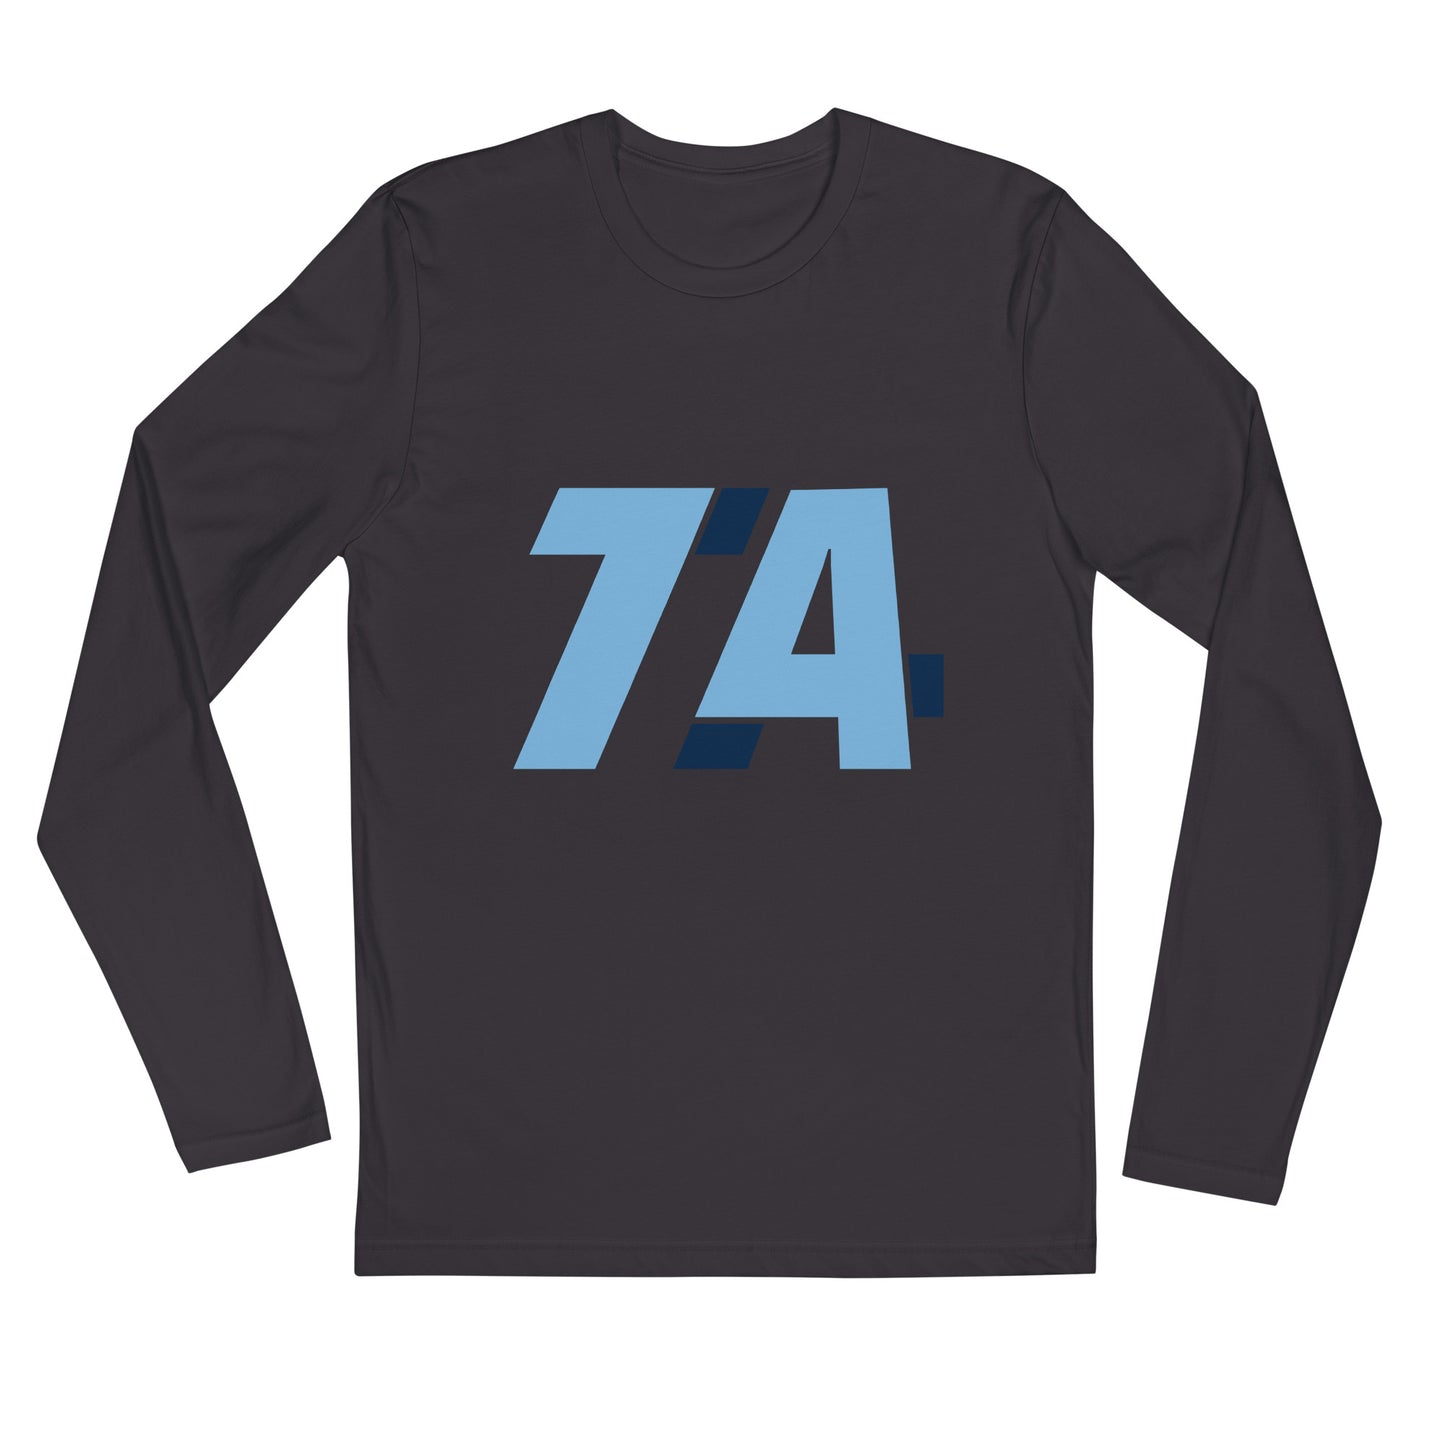 TA74 Long Sleeve Fitted Crew